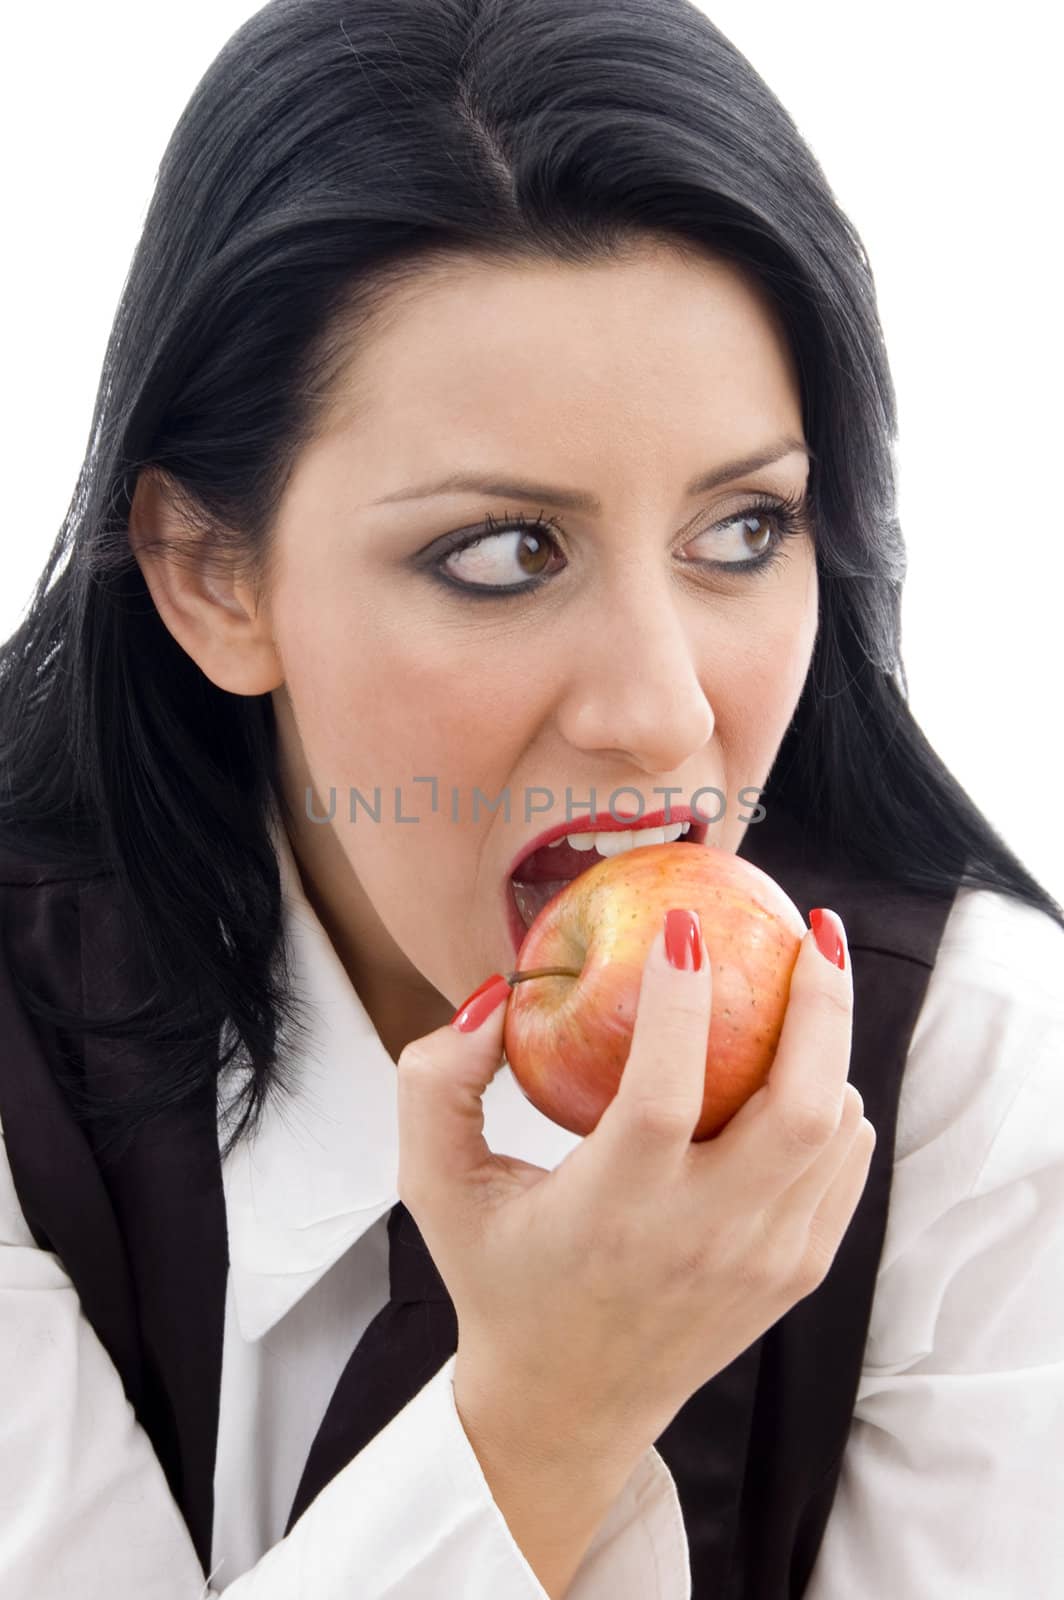 american woman eating an apple on an isolated background